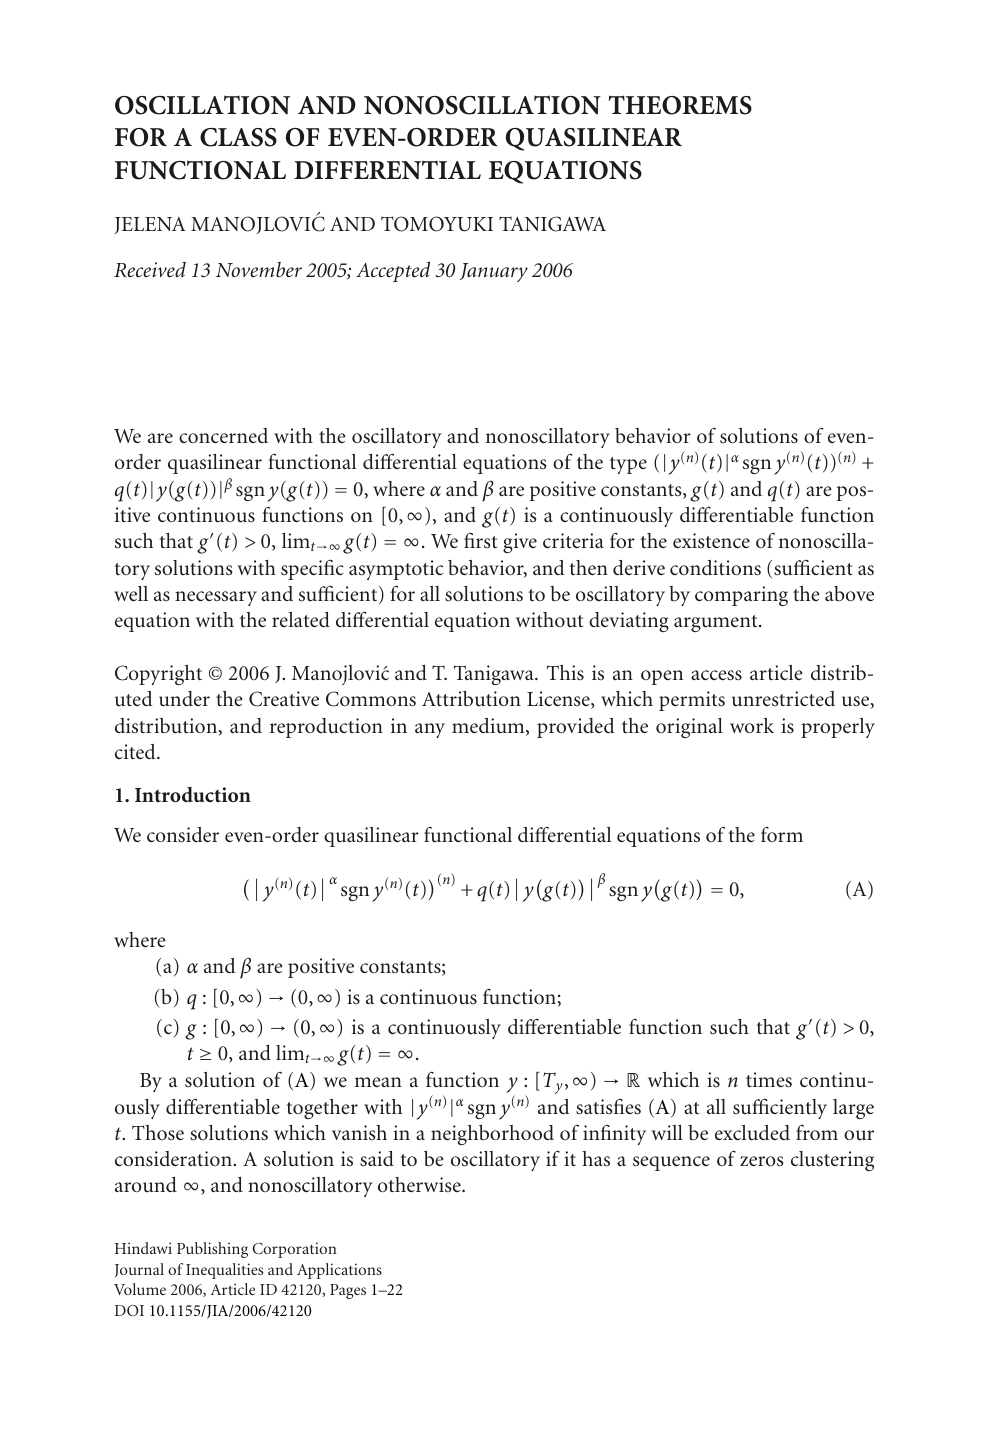 Oscillation And Nonoscillation Theorems For A Class Of Even Order Quasilinear Functional Differential Equations Topic Of Research Paper In Mathematics Download Scholarly Article Pdf And Read For Free On Cyberleninka Open Science